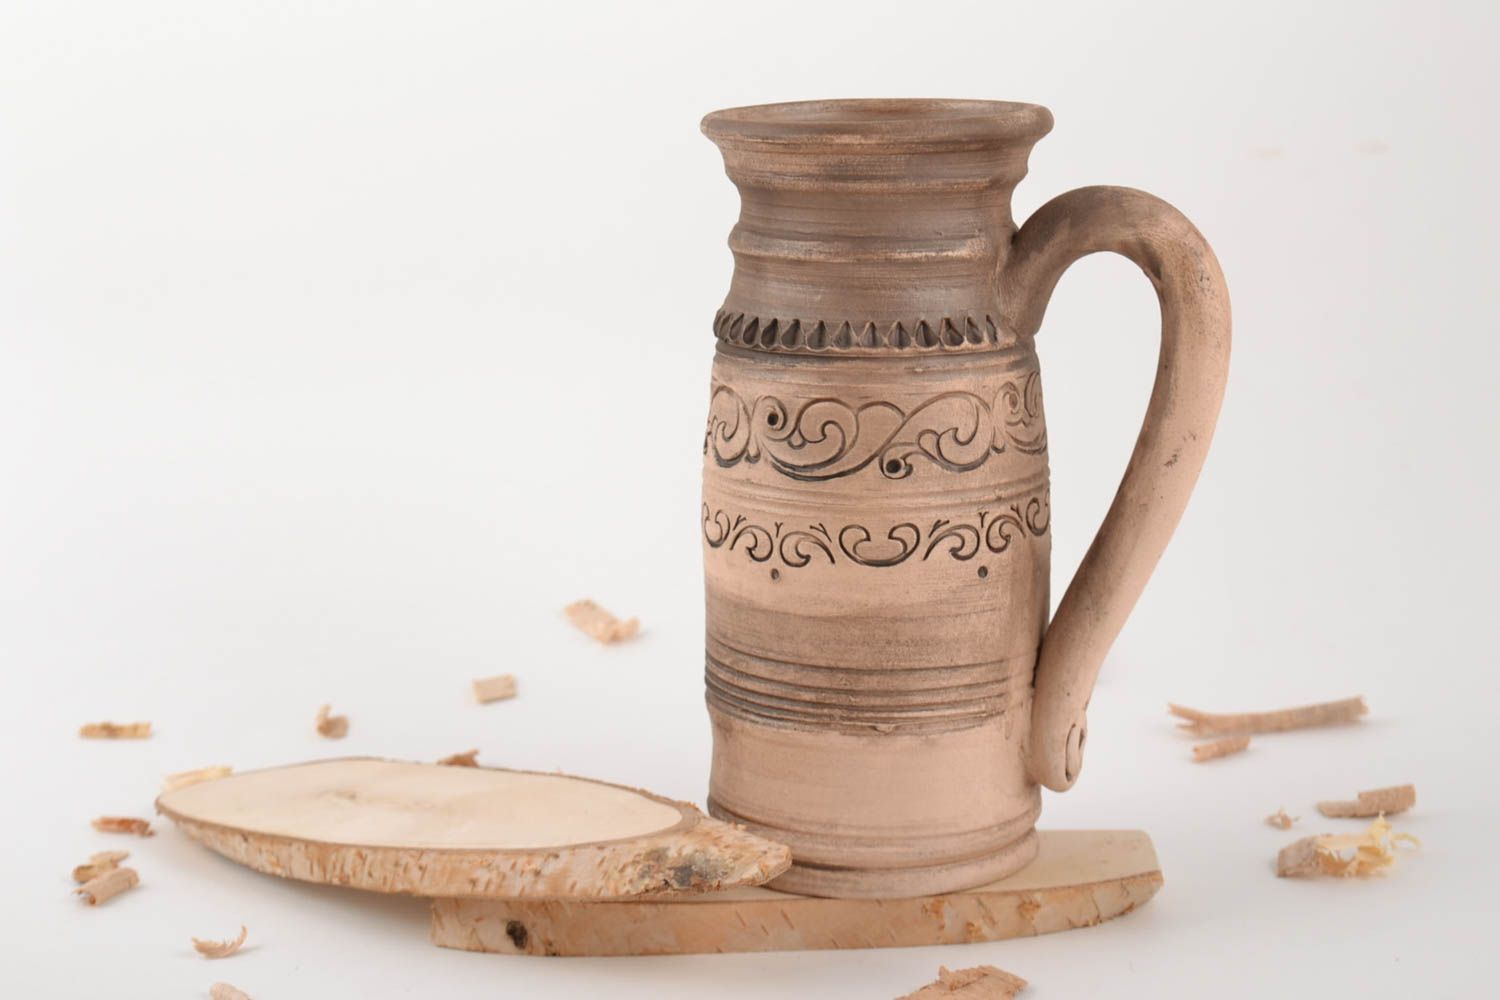 25 oz ceramic handmade pitcher in the shape of the tall jug with a handle made of white clay 1,47 lb photo 1